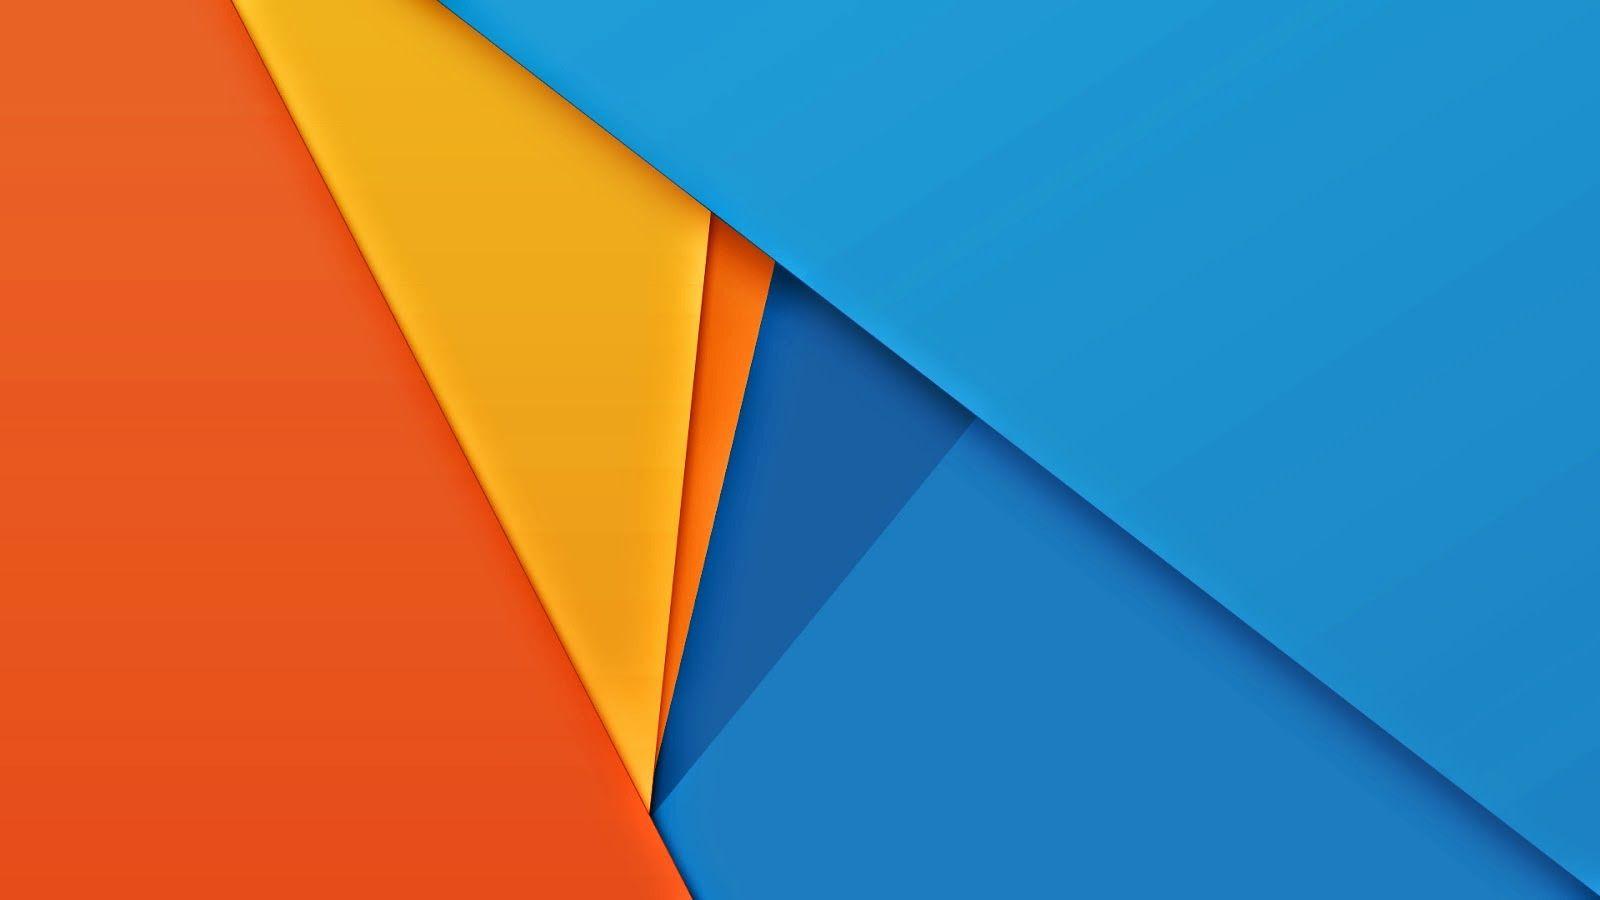 1000+ image about Material Design Wallpapers For Mobile and